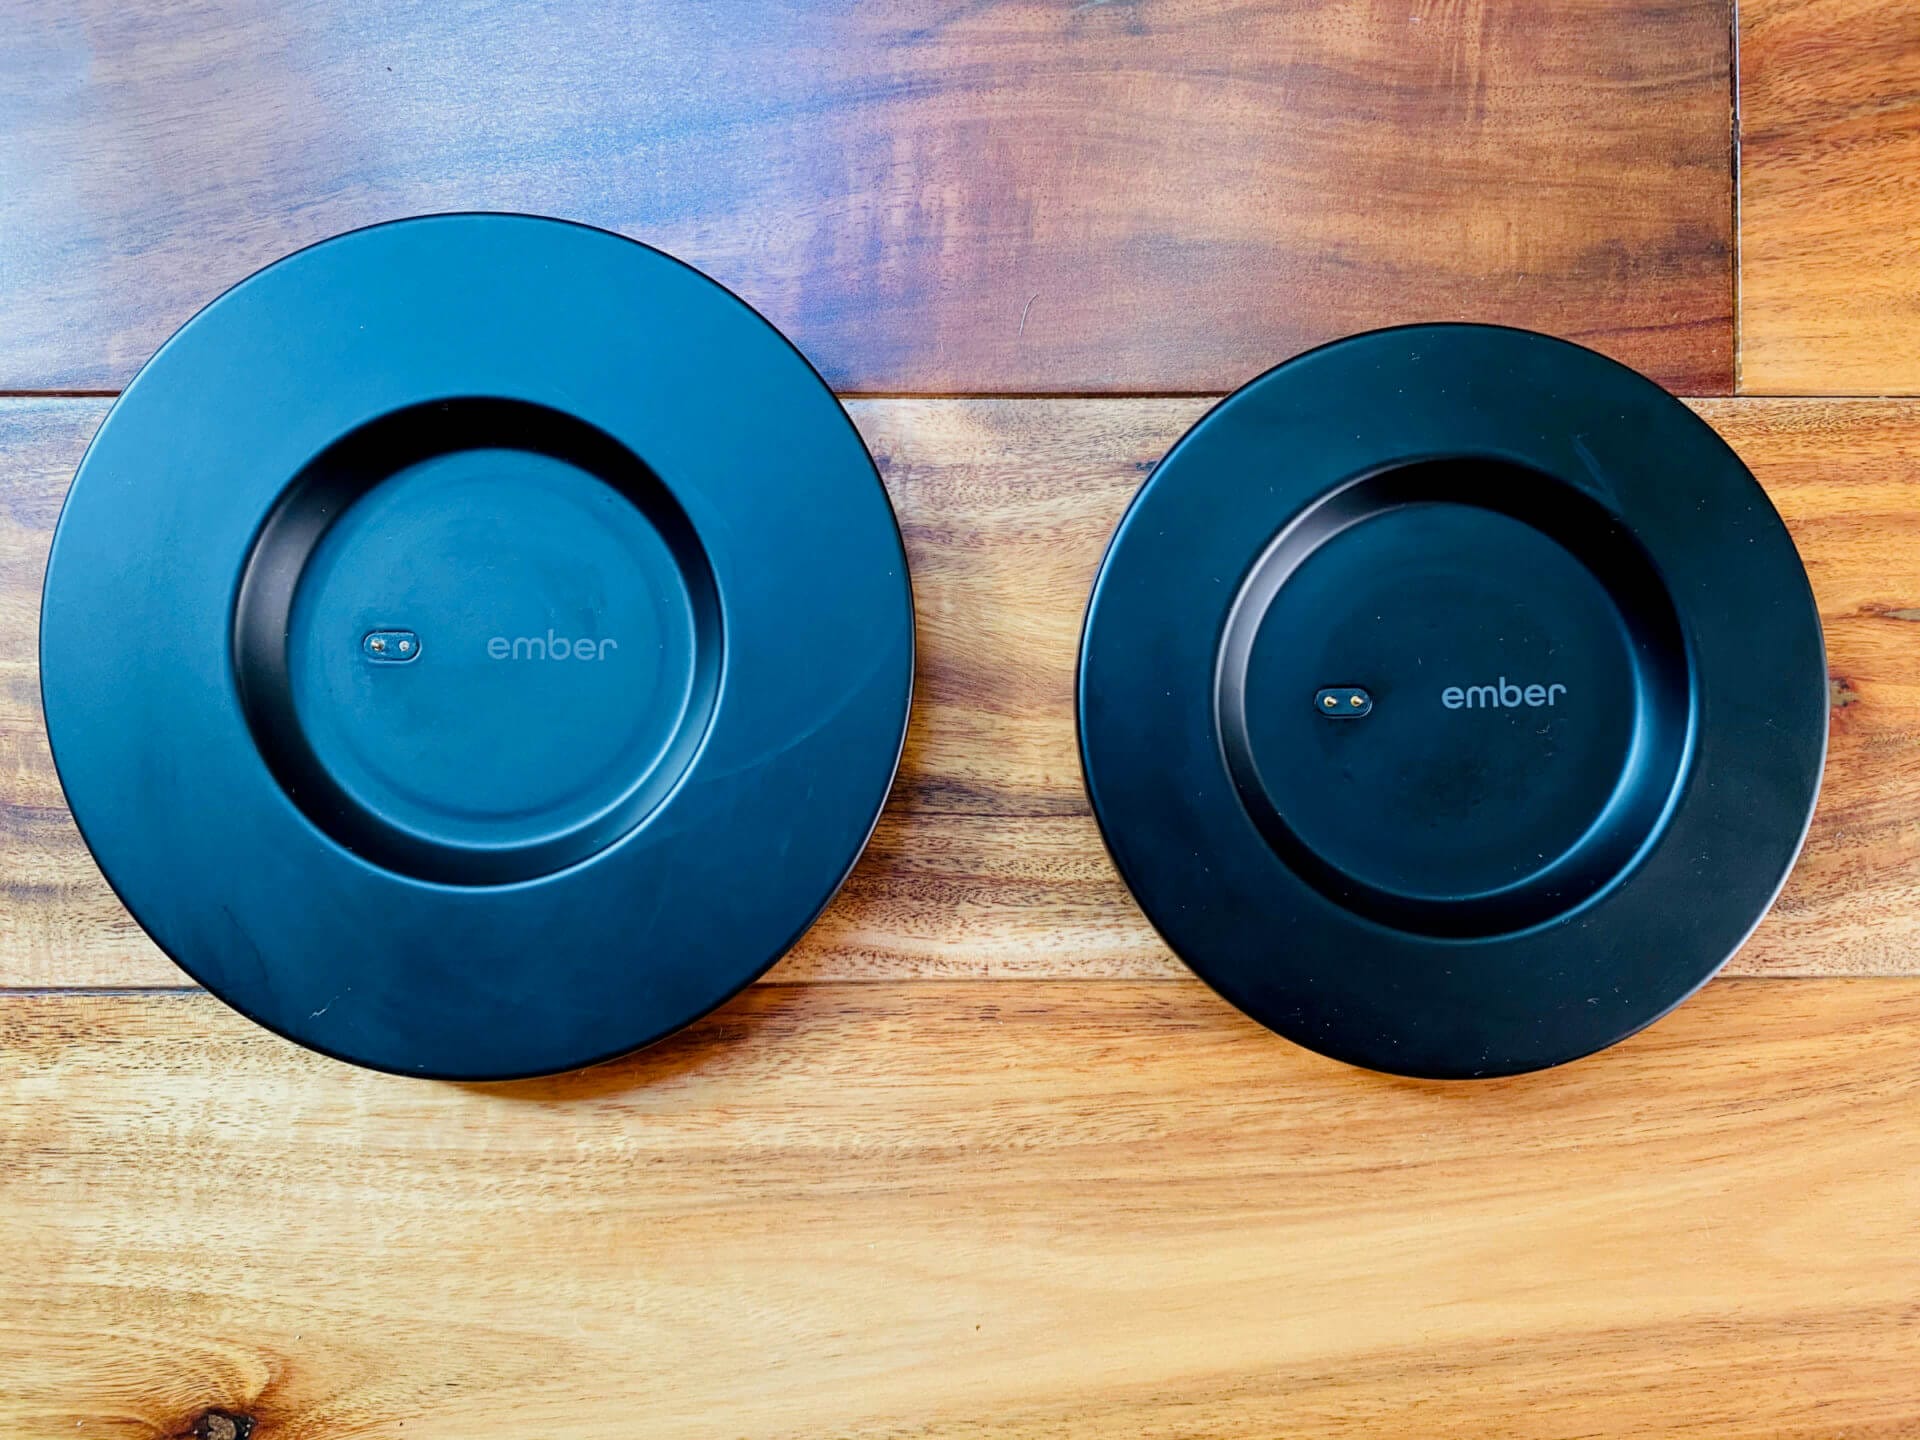 Size difference of the first- and second-generation charging coasters